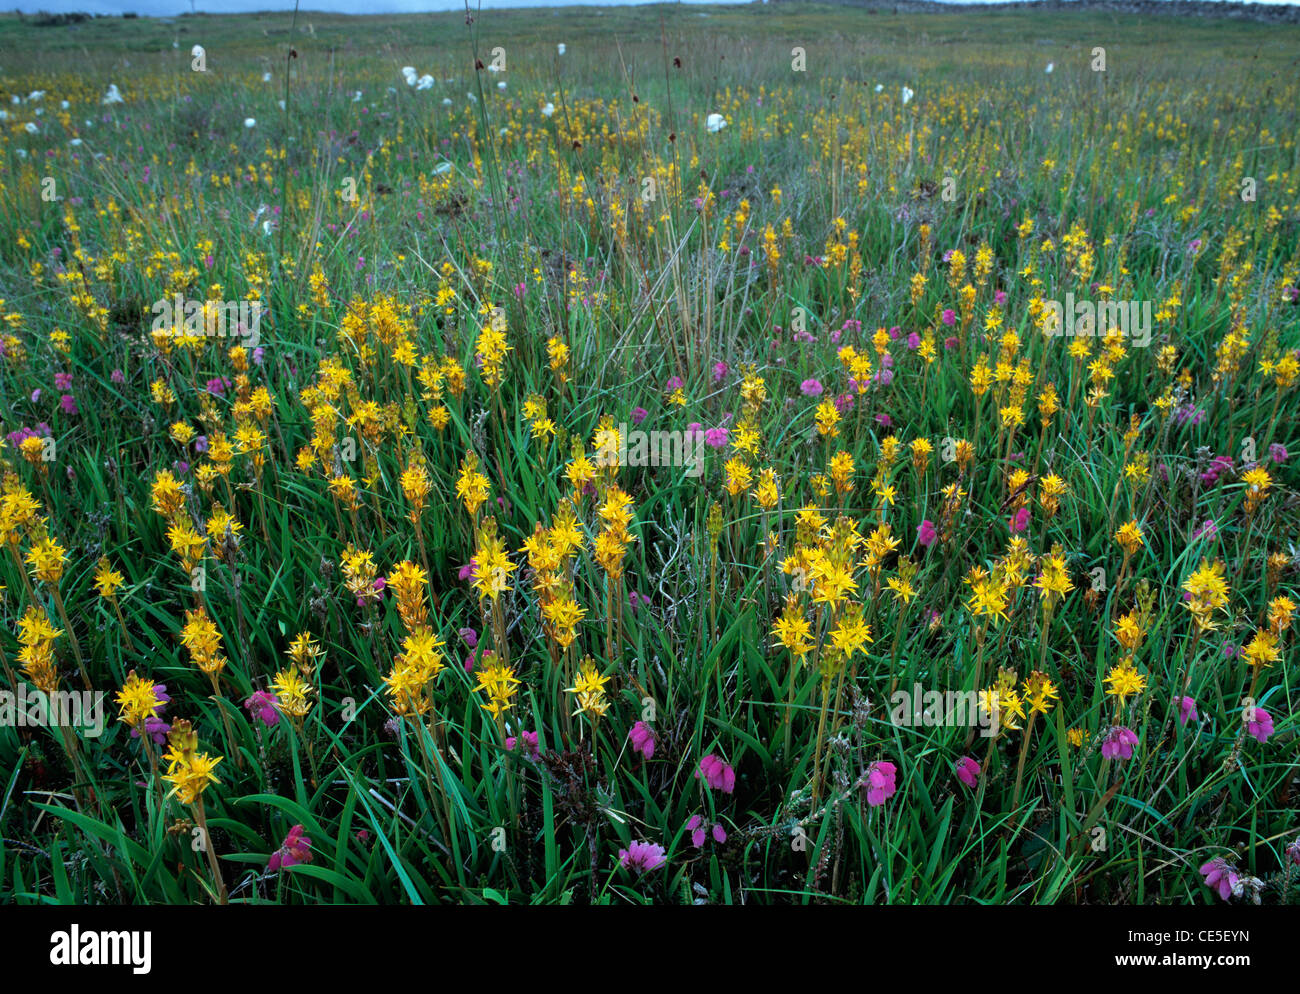 Bog Asphodels, with Cross-leaved Heath, in wet meadow near Wick, on the edge of the Flowe Country, Scotland. Stock Photo